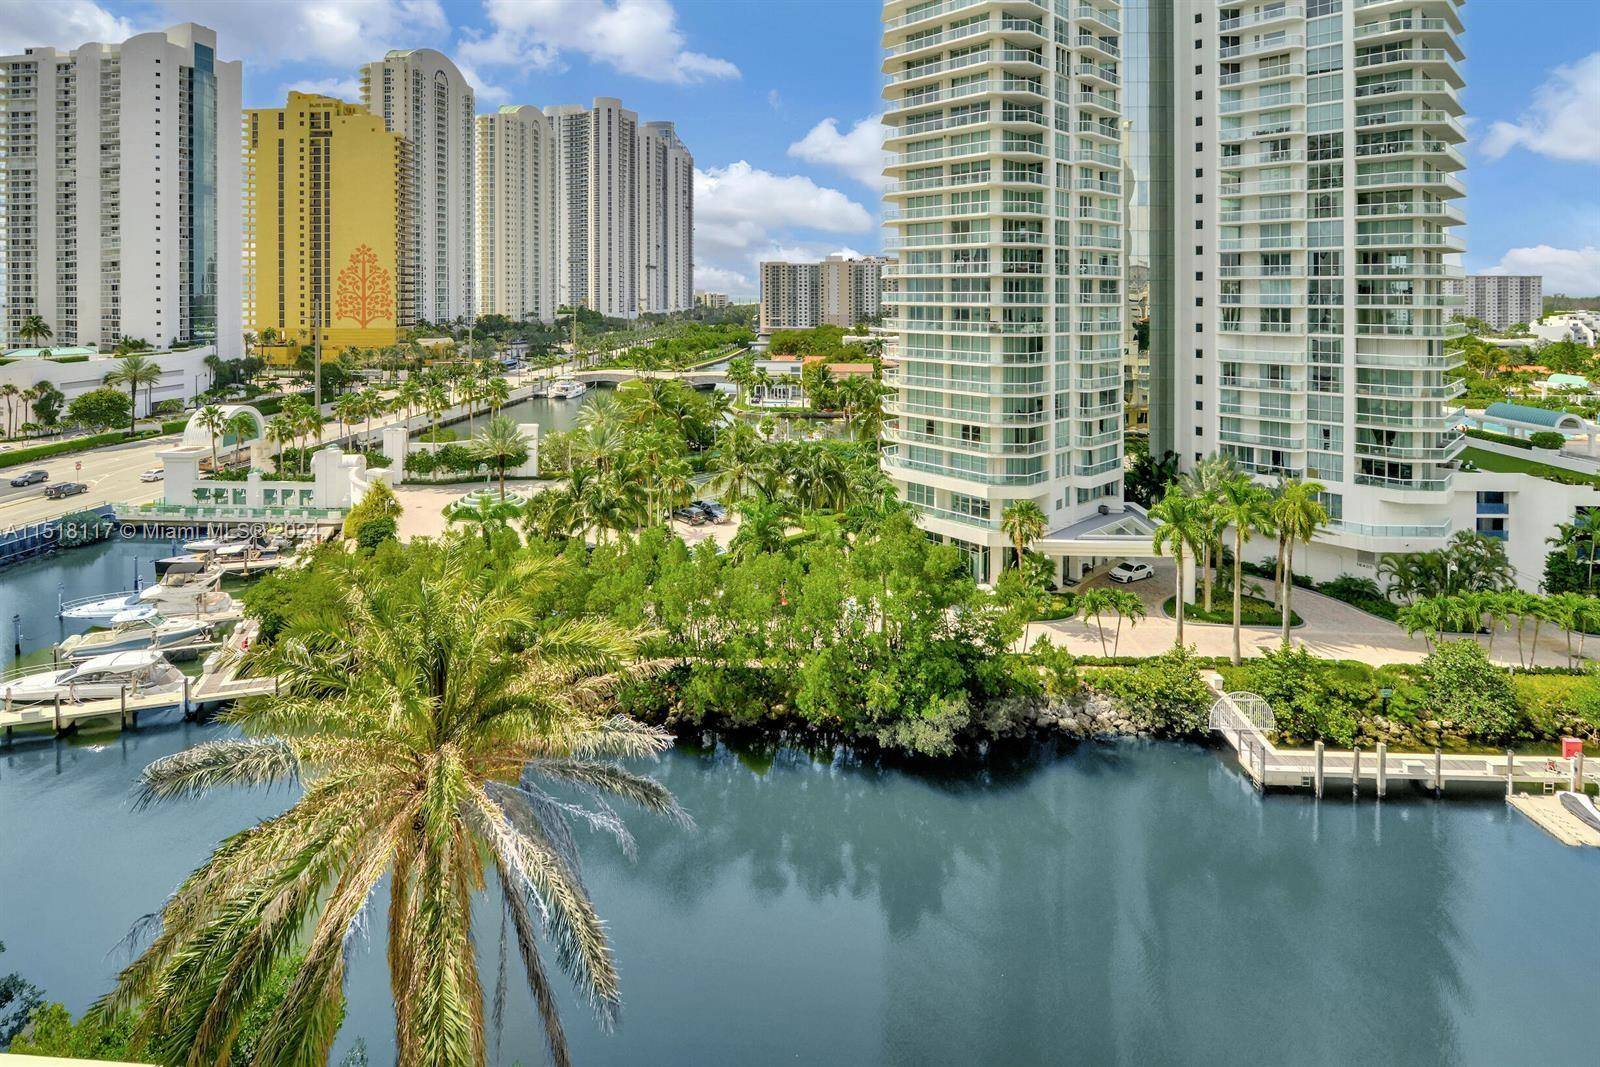 Feel like you're in the French Riviera with this FULLY furnished, 3 bedroom, spacious condo in Sunny Isles.